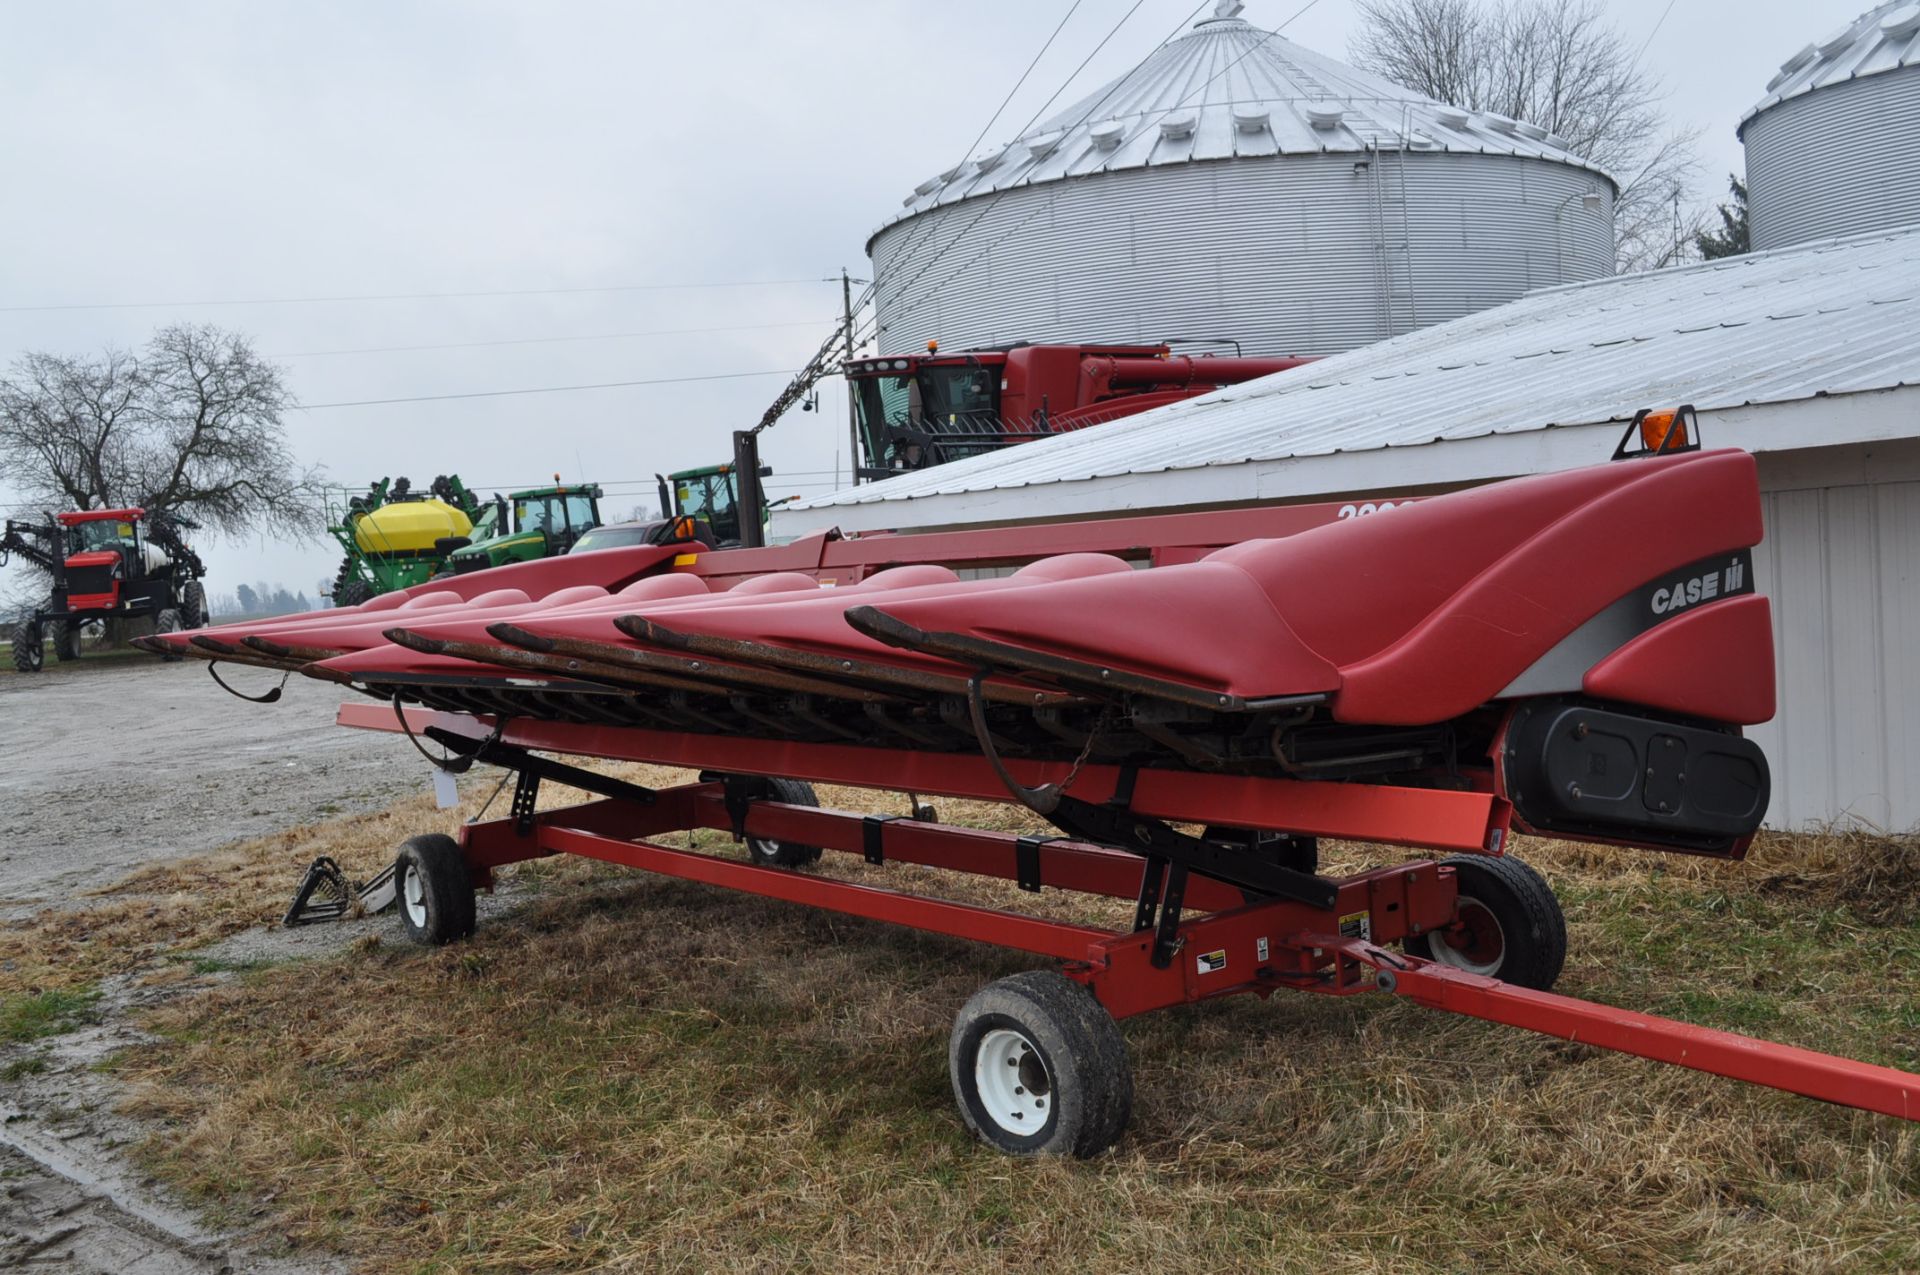 CASE IH 2208 Poly Corn Head, 8 rows x 30”, hyd deck plates, knife rolls, poly, 3 header height - Image 2 of 16